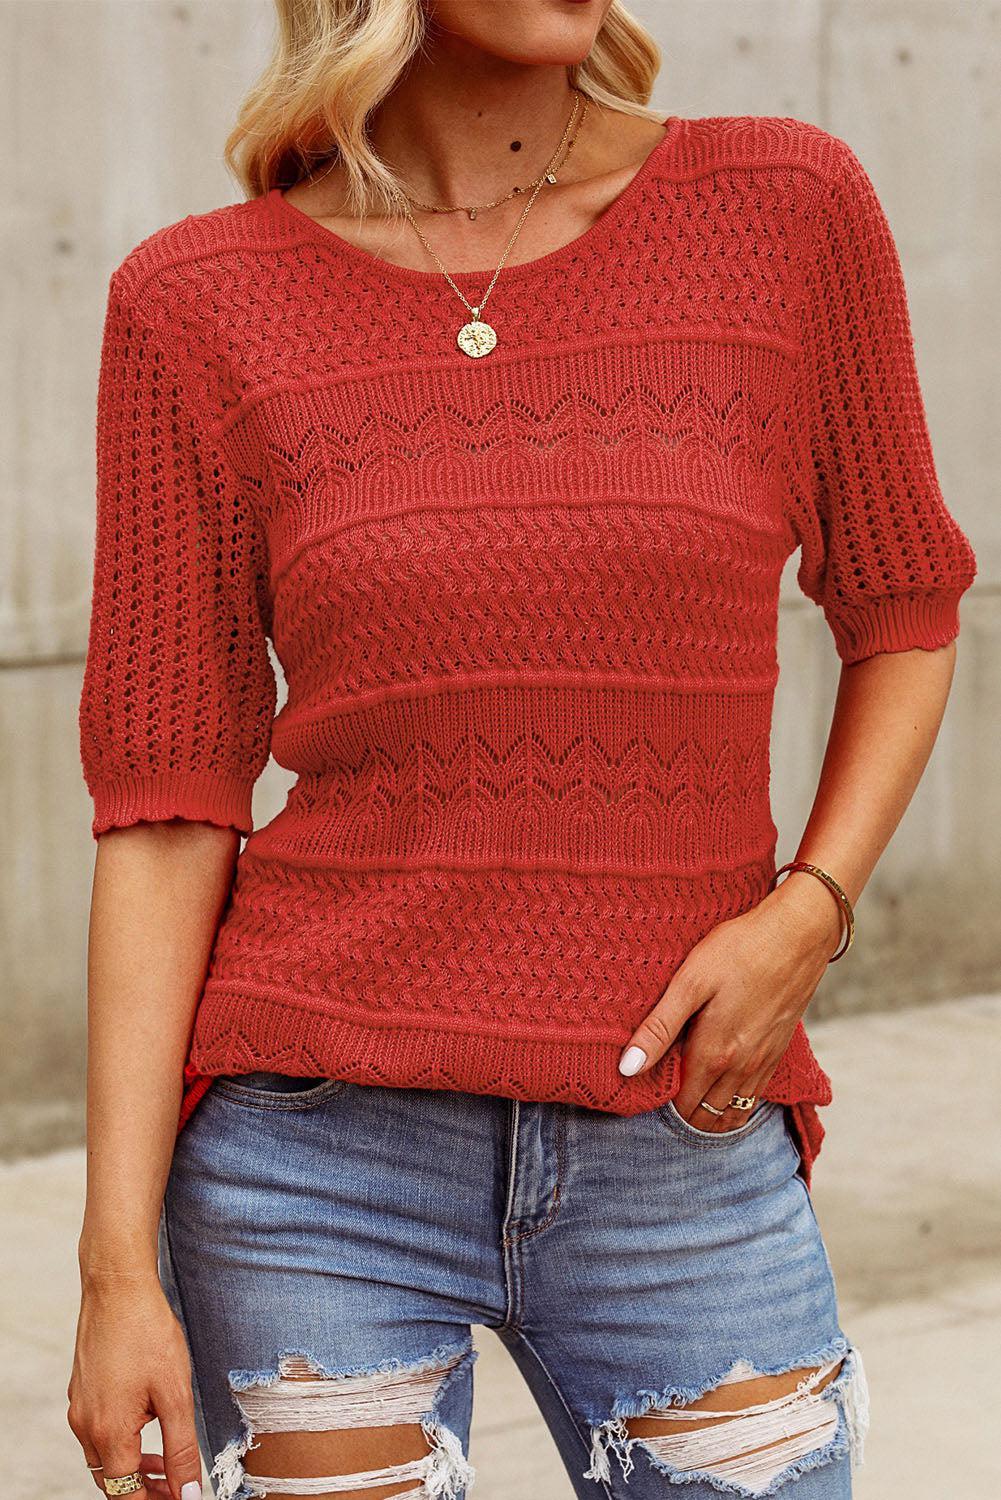 a woman wearing a red sweater and ripped jeans